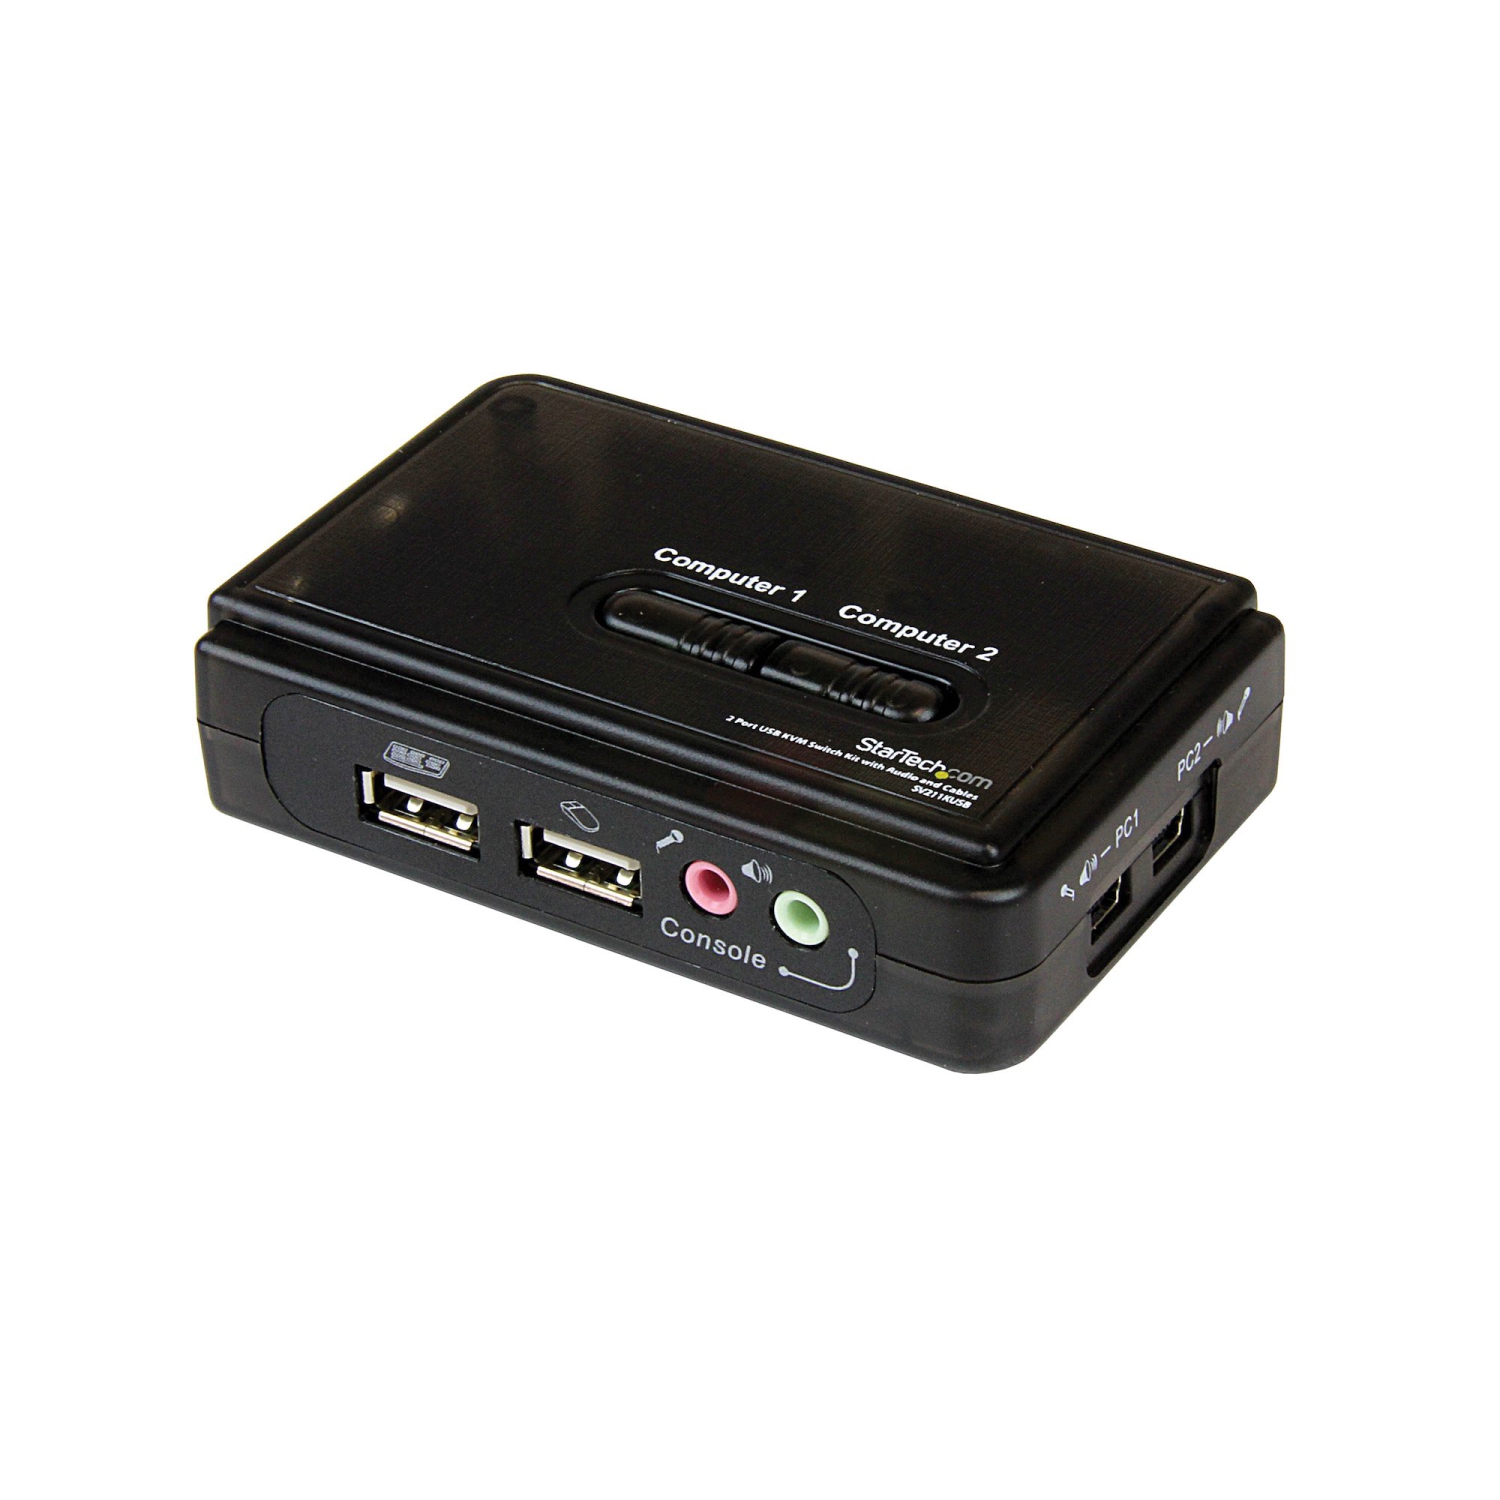 StarTech 2-Port VGA and USB KVM Switch with Cables Included-(SV211KUSB)